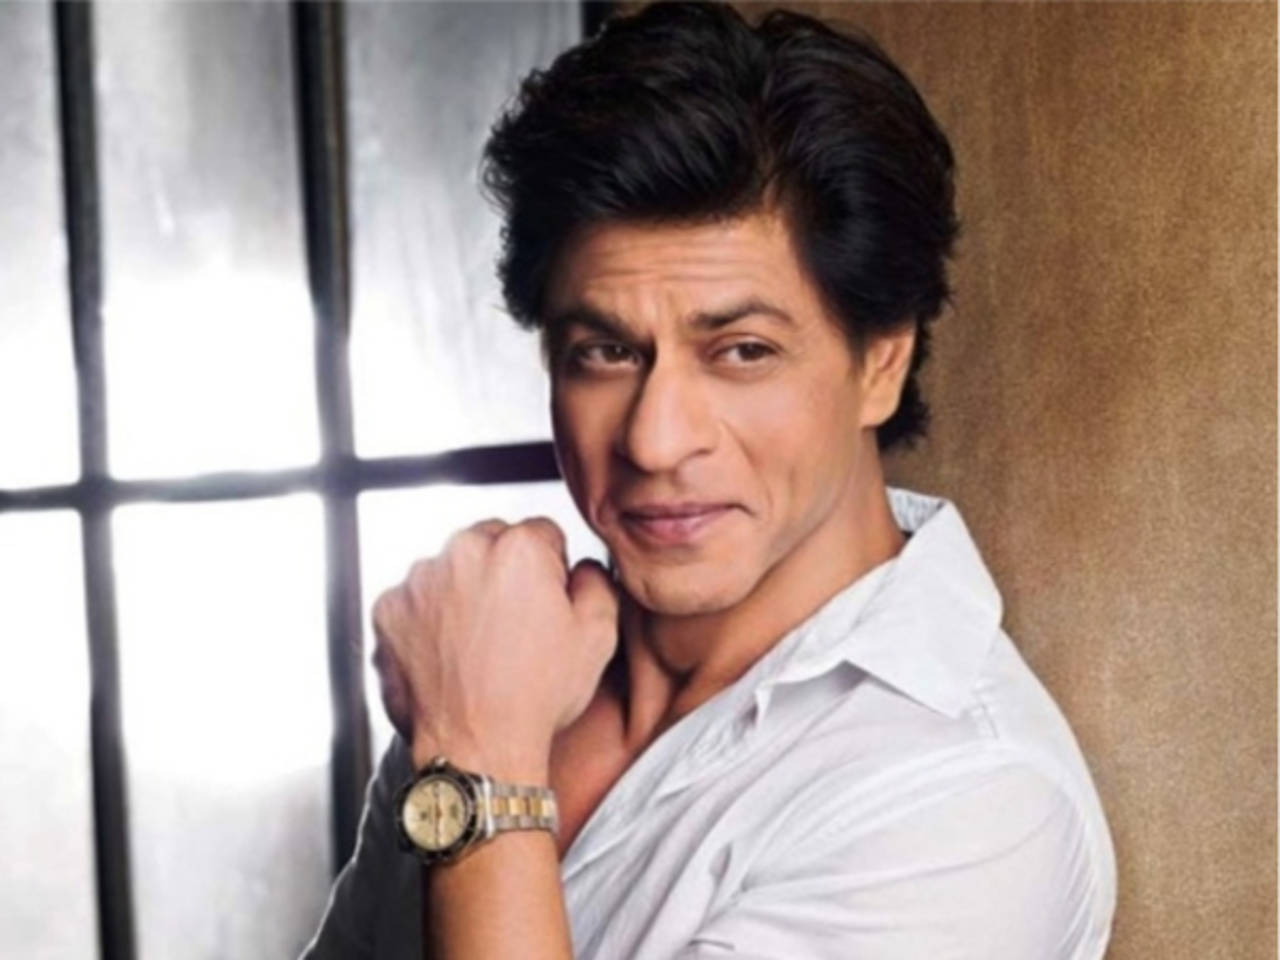 Was challenging playing a 24-year-old boy, says Shah Rukh Khan